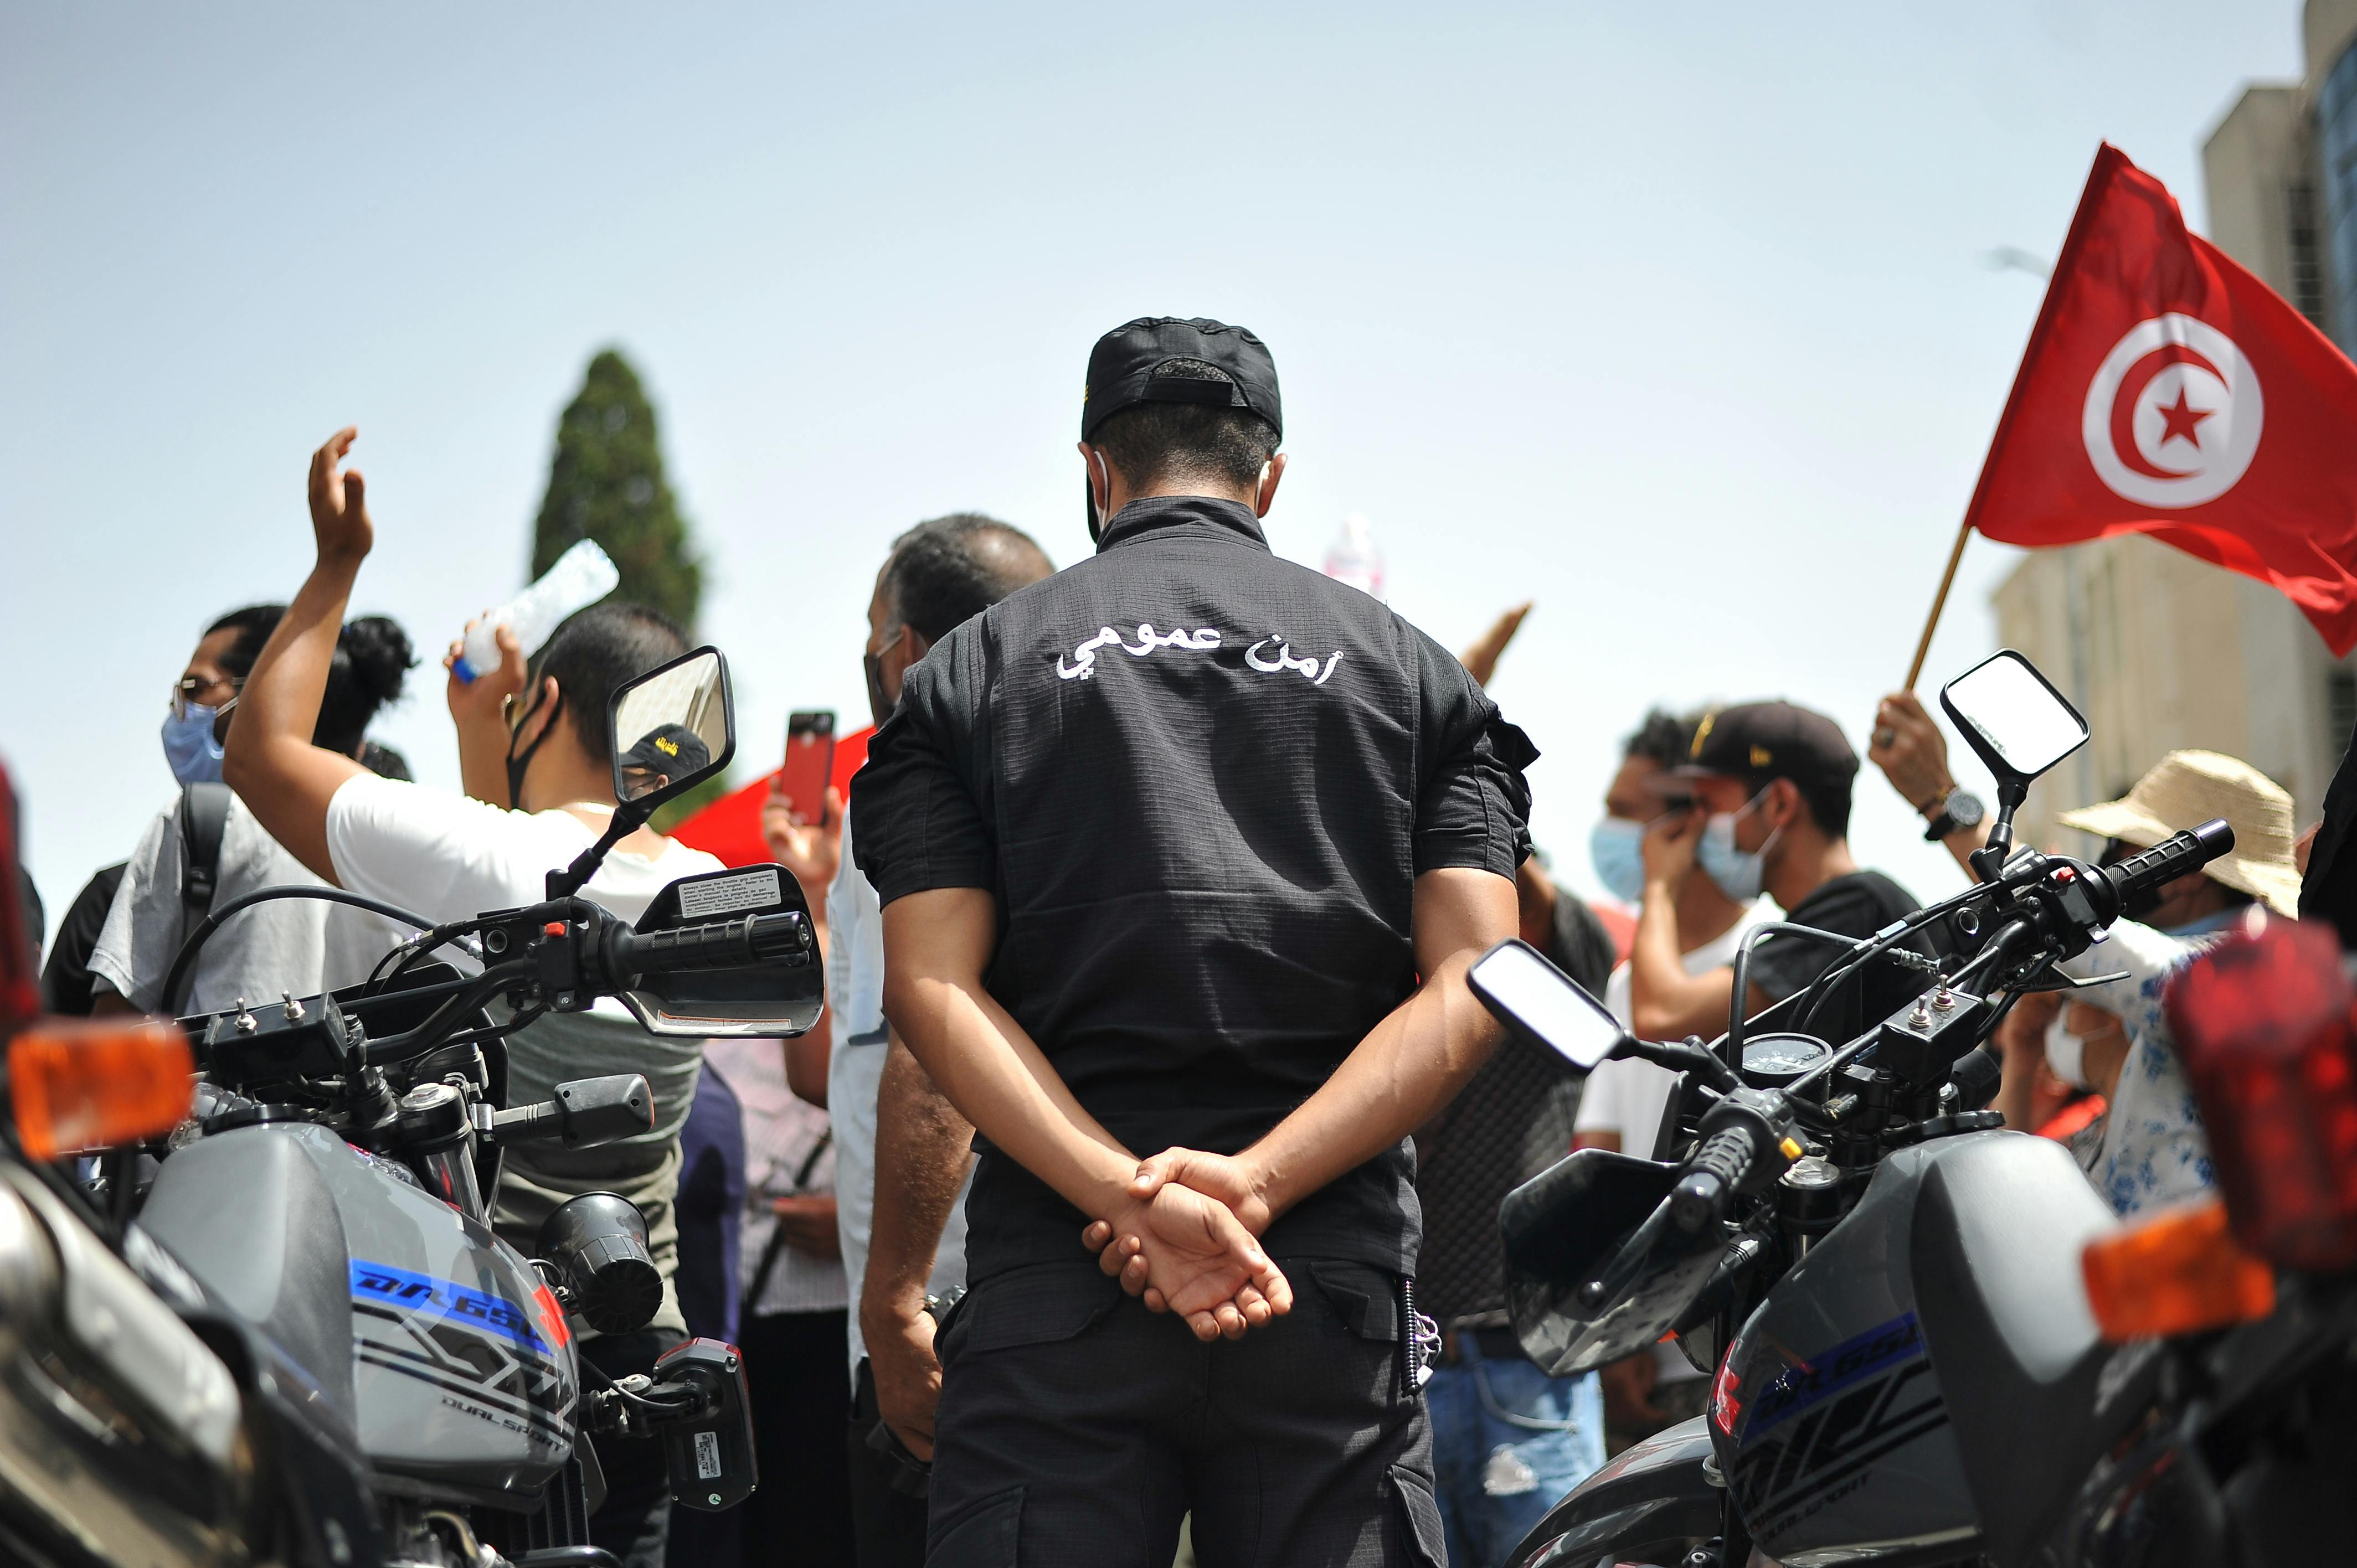 A police agent, framed by two motorcycles, turns his back to the picture as protestors carrying Tunisian flags walk by him.